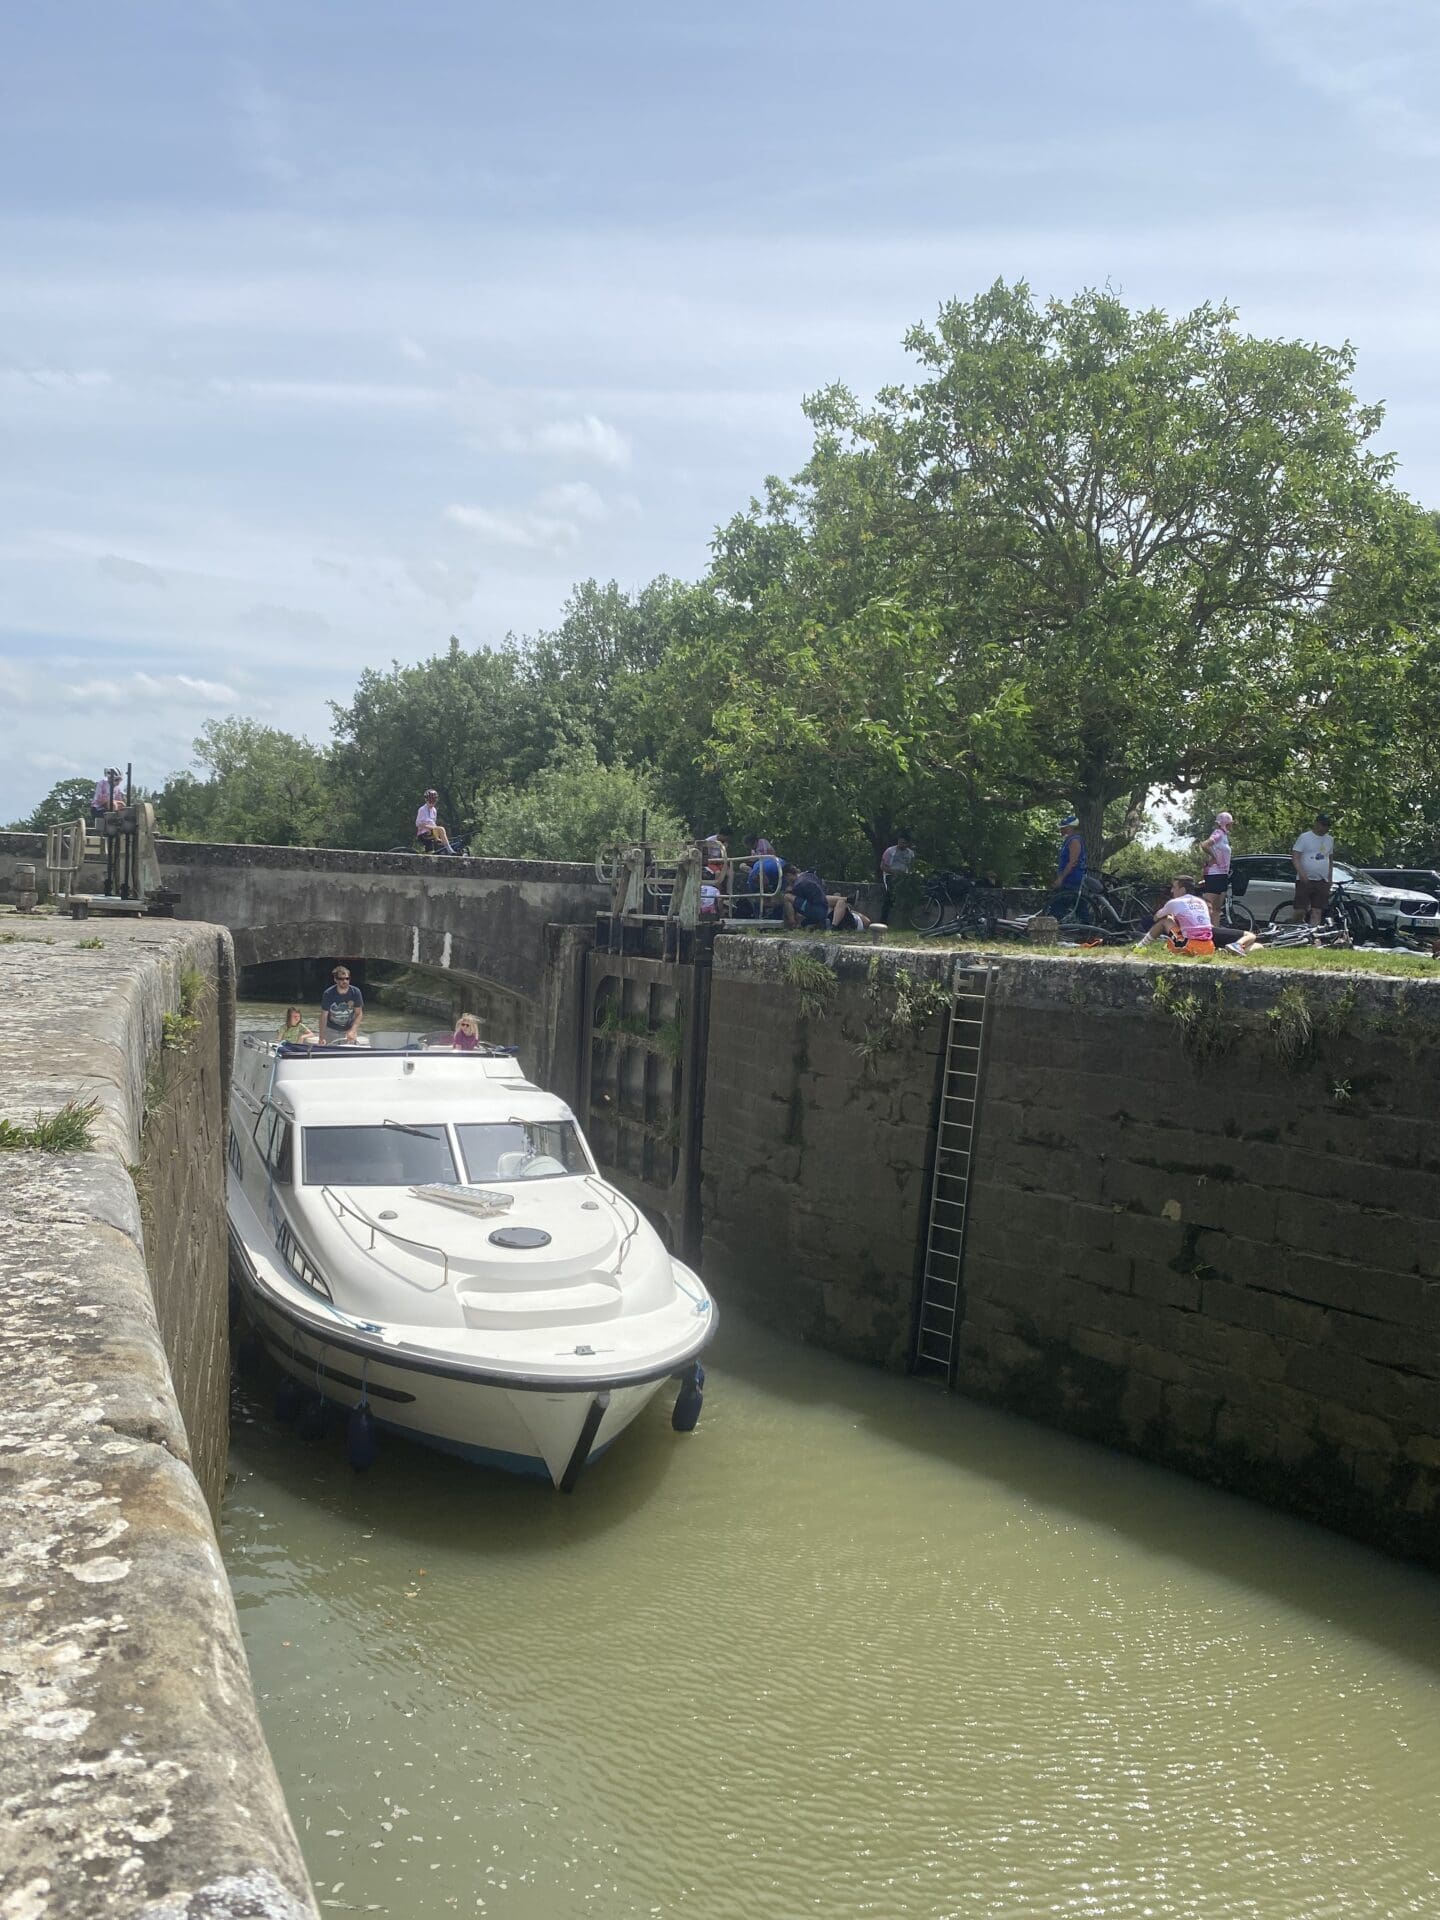 Boat entering a lock on canal